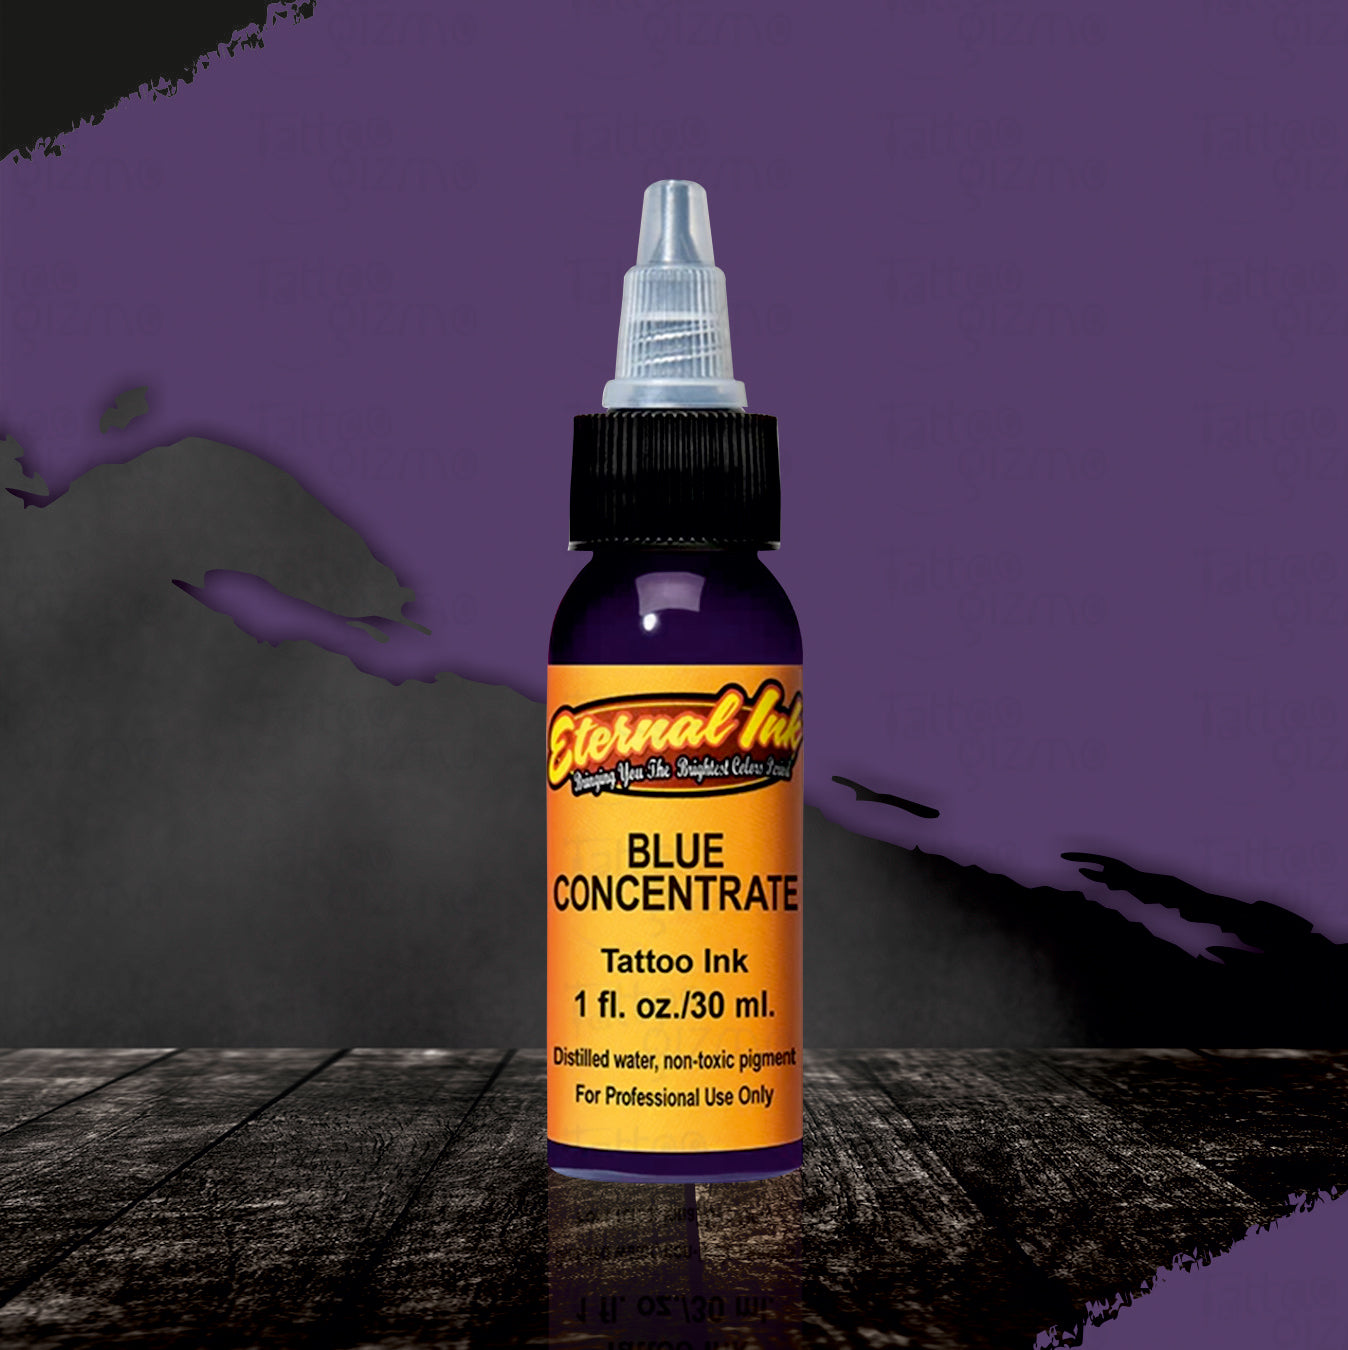 Blue concentrate tattoo ink